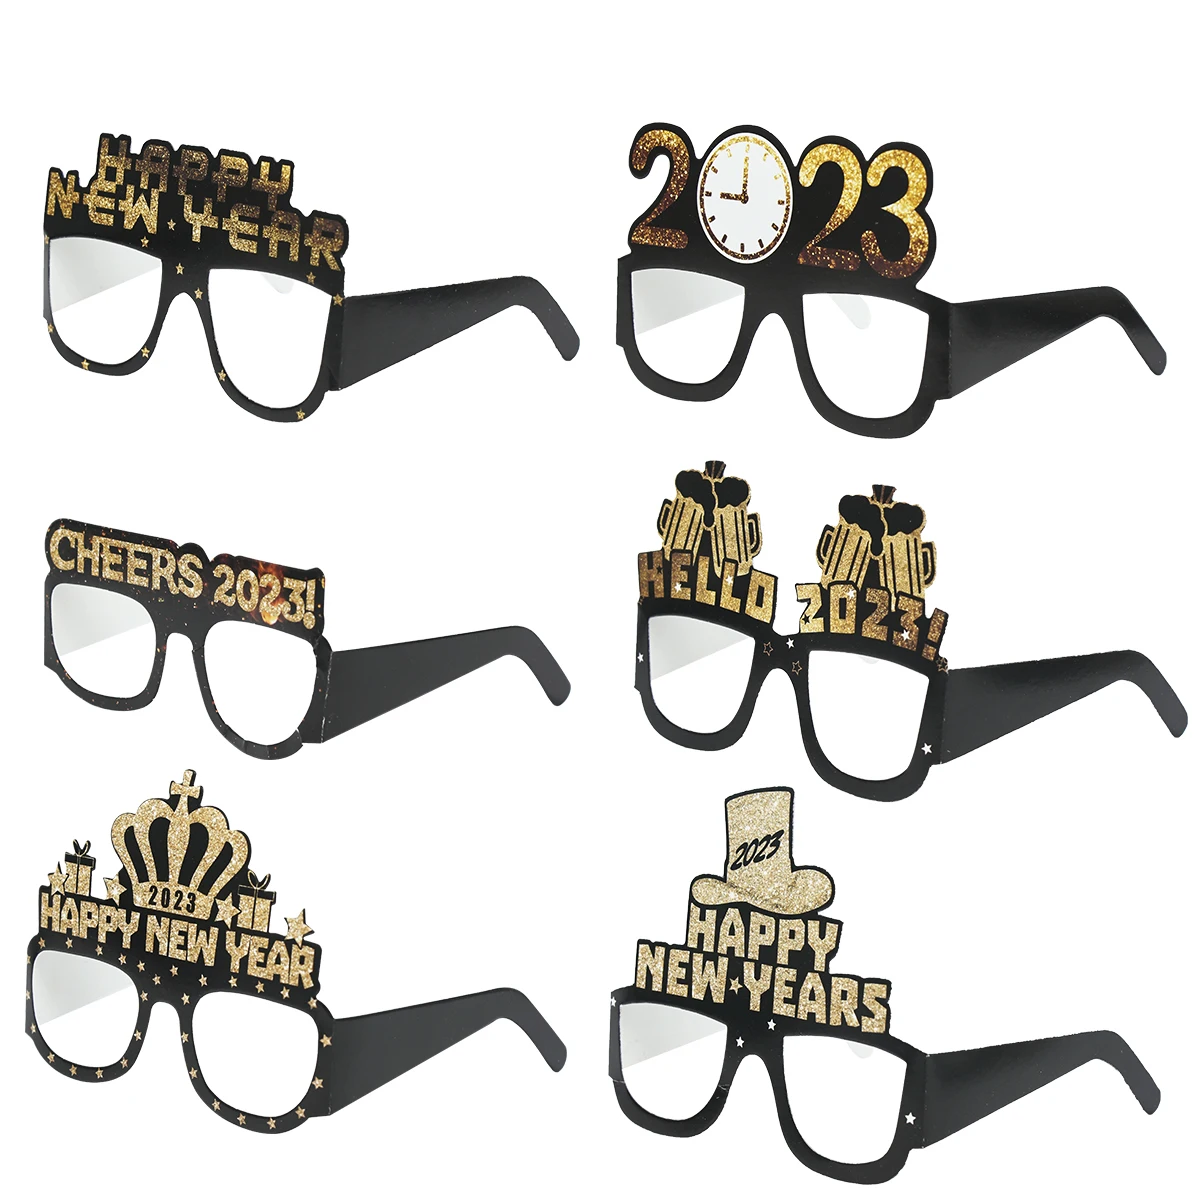 

Happy New Year Cheers 2023 Black Gold Paper Glasses Party Photo Props Merry Christmas Decorations For Home Xmas Ornament Navidad